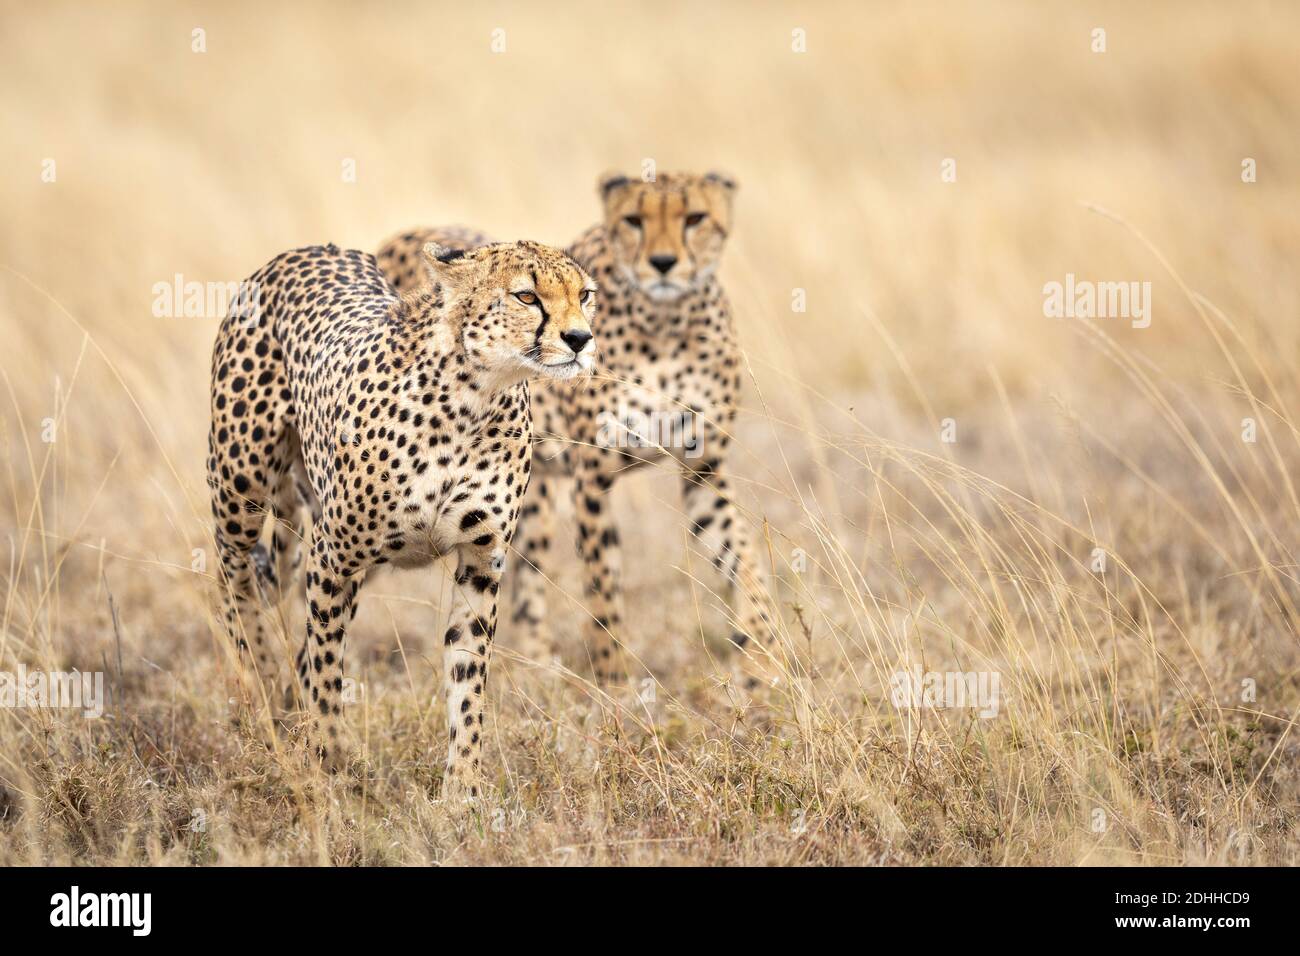 Two adult cheetah walking in dry yellow grass in the plains of Serengeti National Park in Tanzania Stock Photo